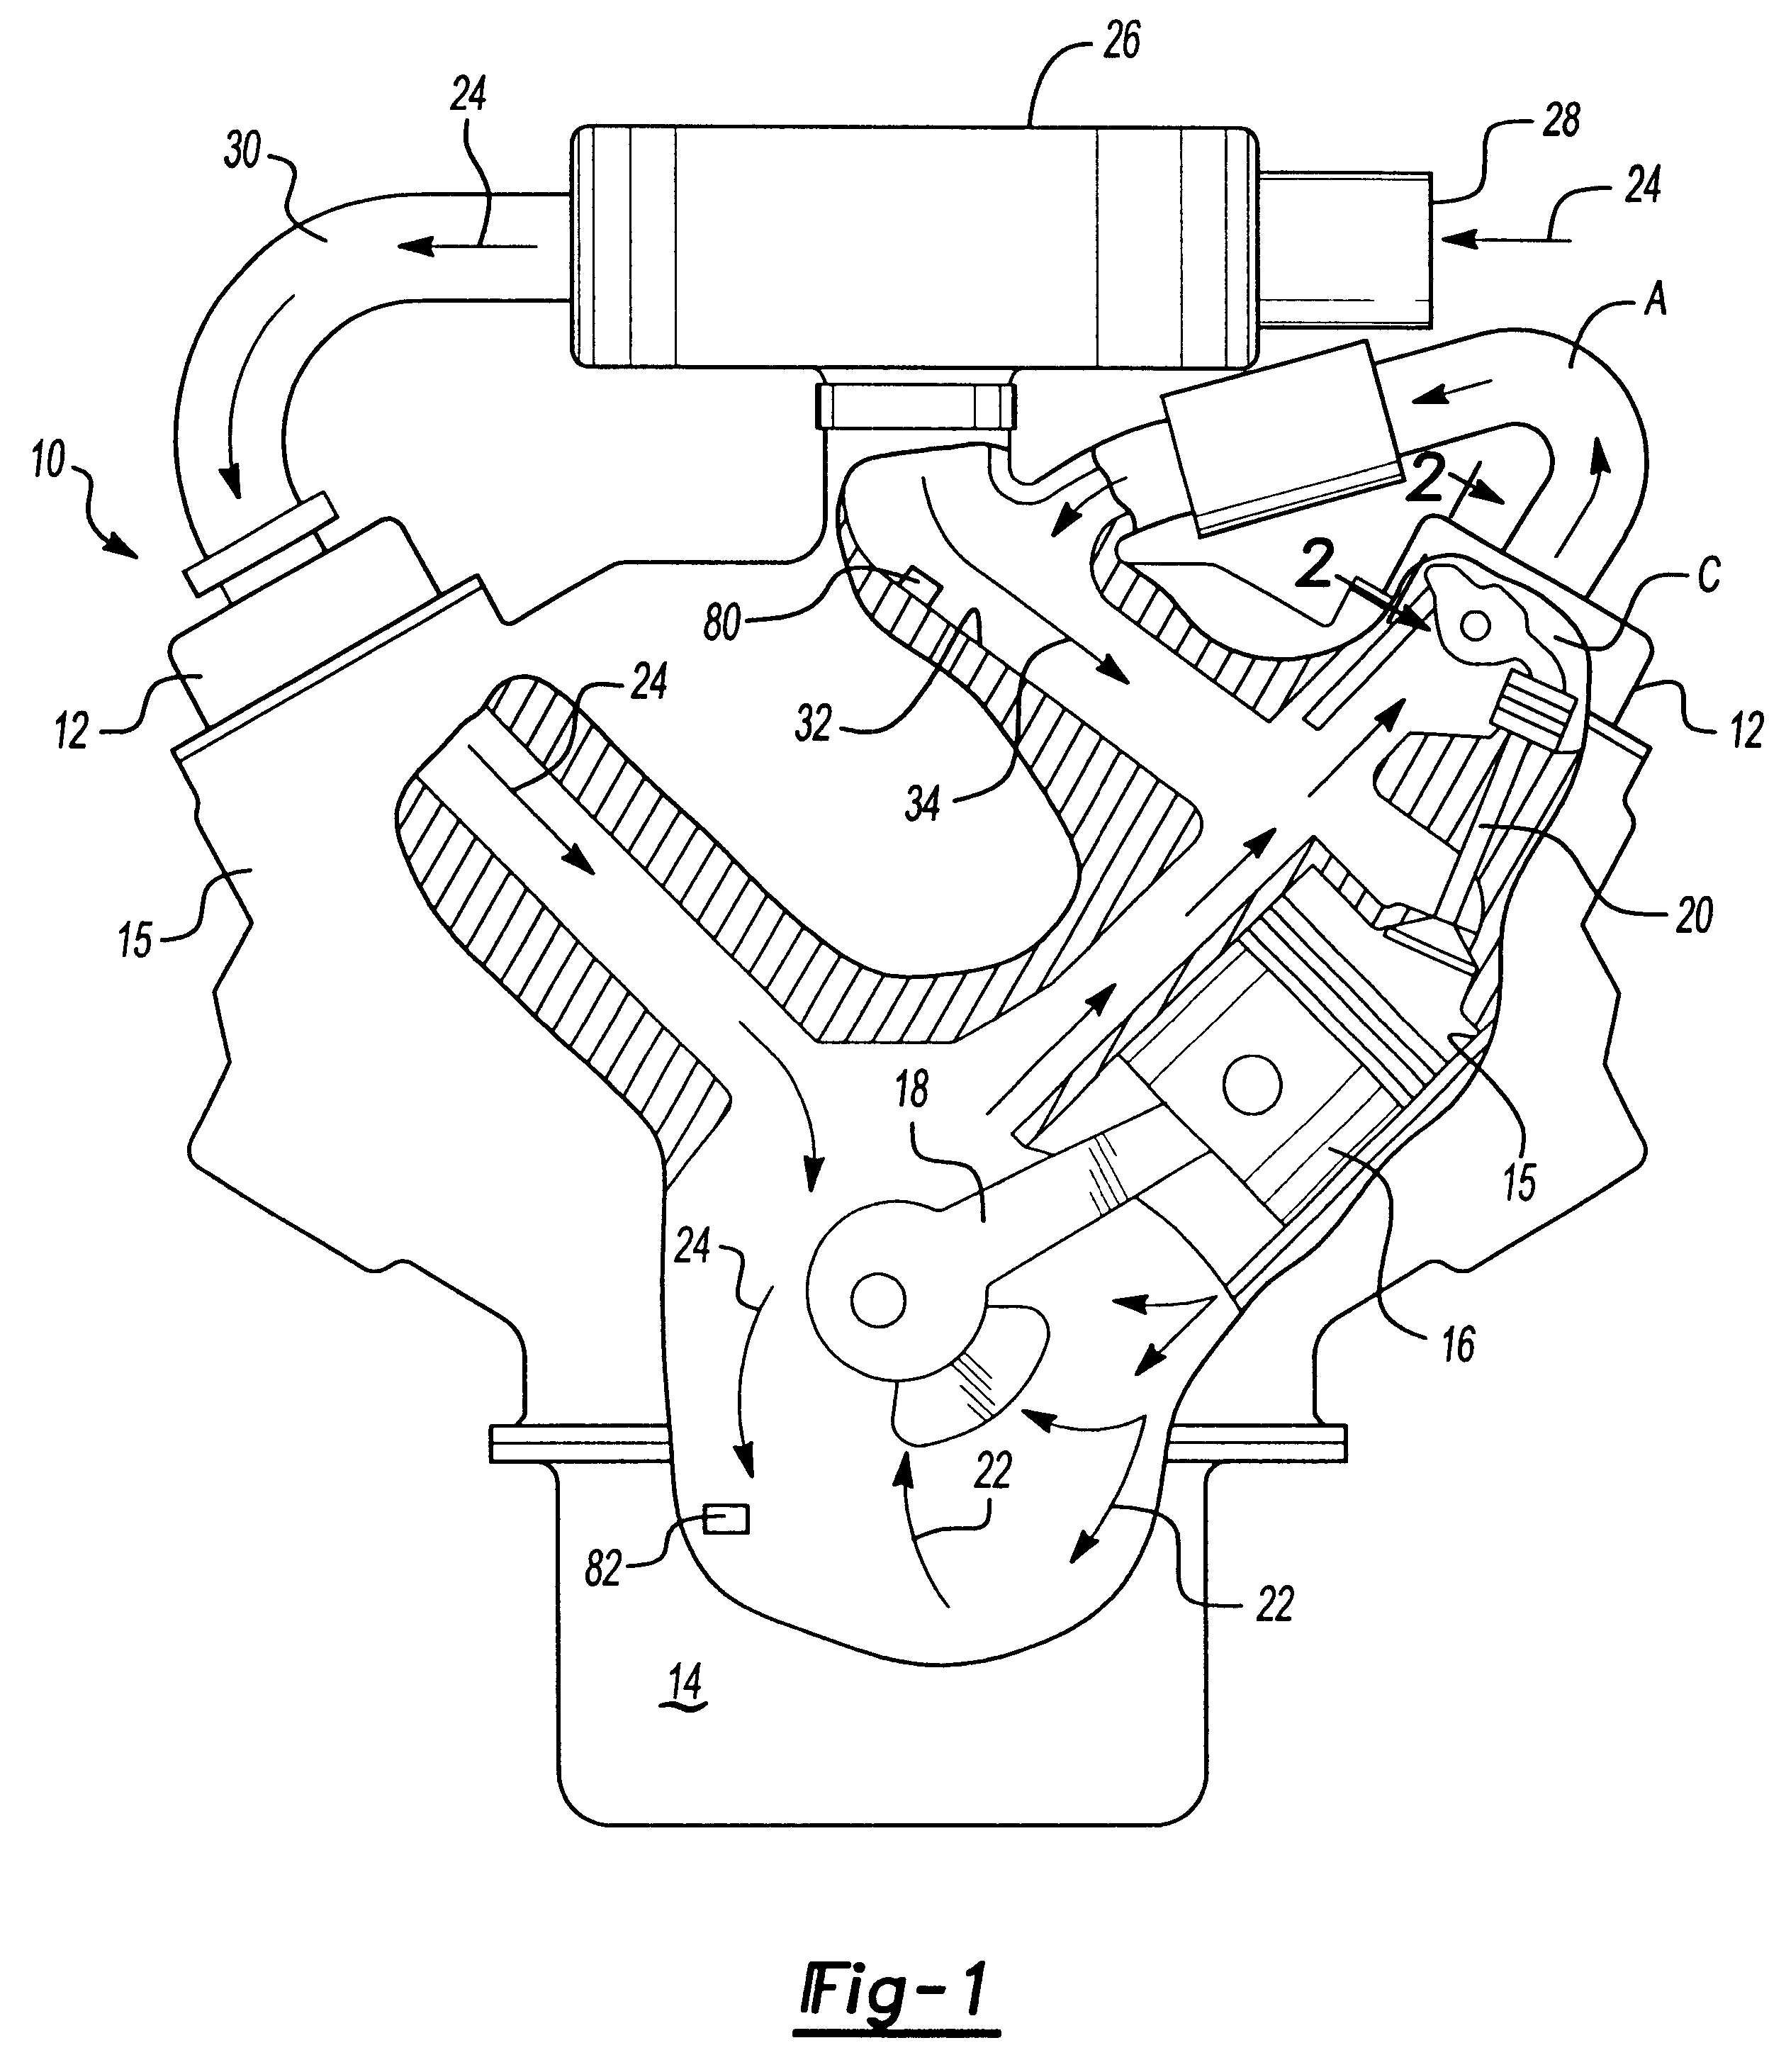 Crankcase bypass system with oil scavenging device